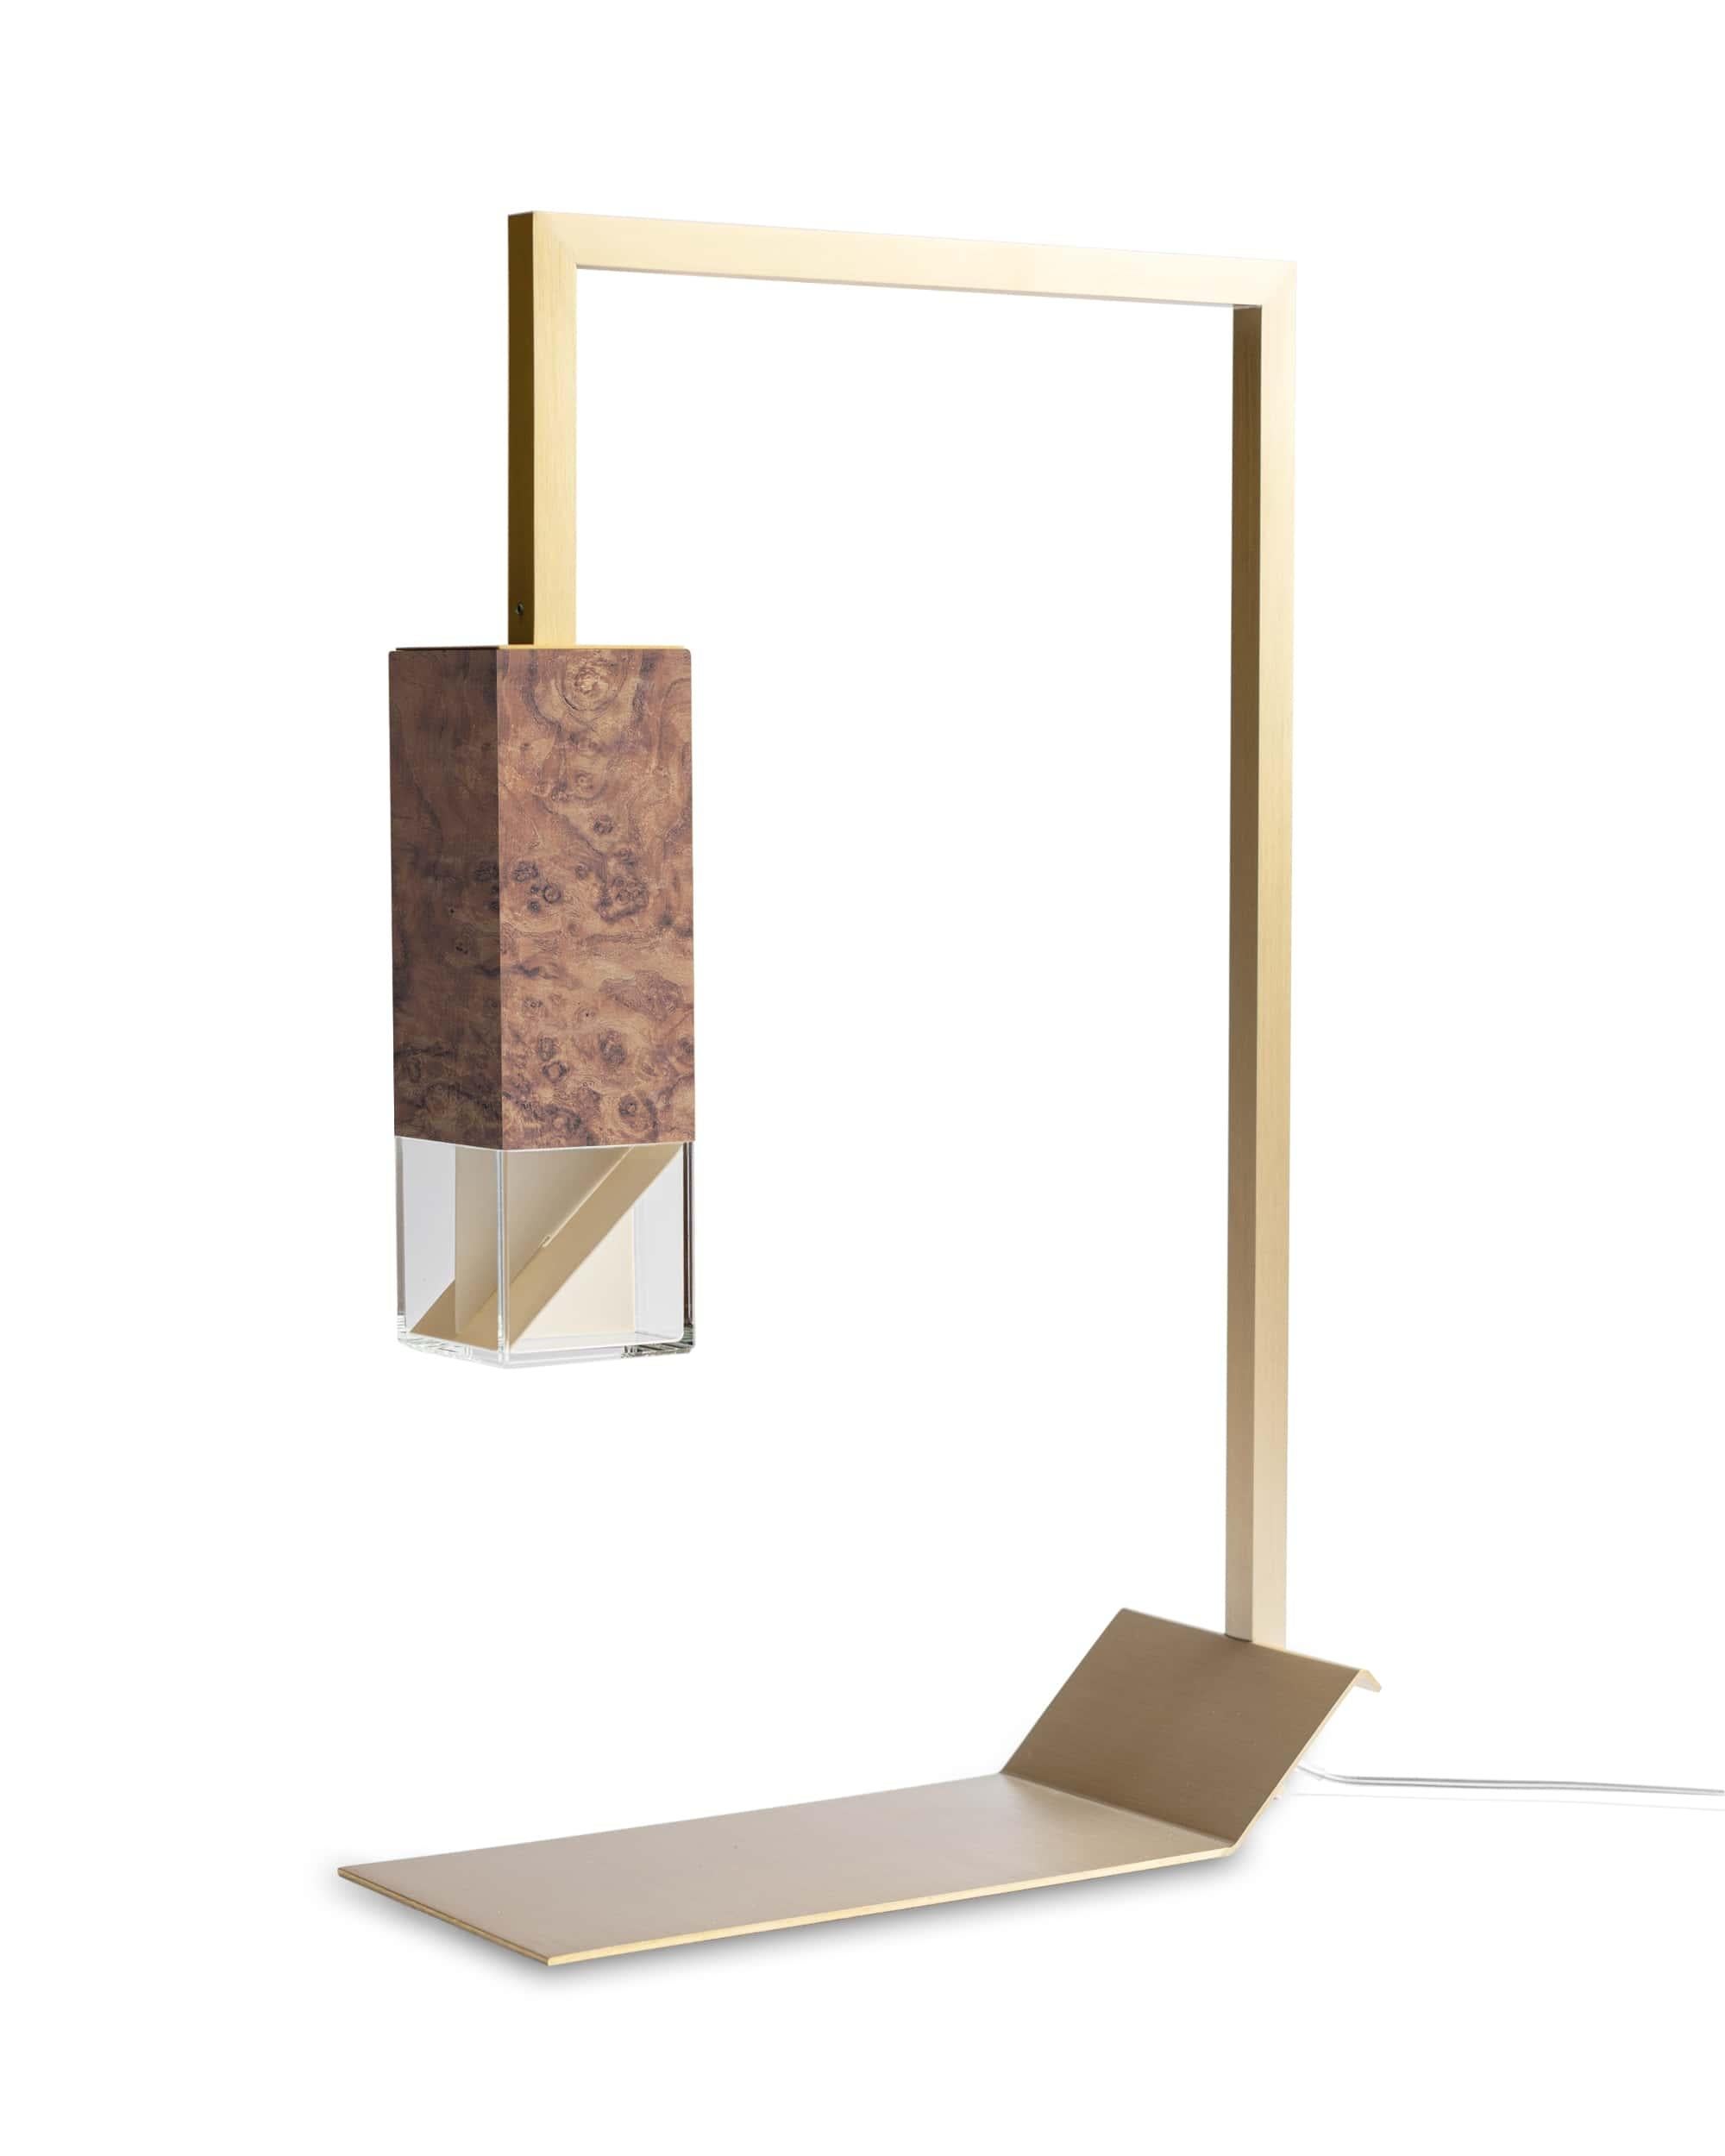 Wood Table Lamp Two 02 Revamp Edition by Formaminima.
Limited Edition of 250 pieces. Numbered and signed with certificate of authenticity.
Dimensions: W 10 x D 25 x H 40 cm.
Materials: Walnut briarwood, brass, crystal.

All our lamps can be